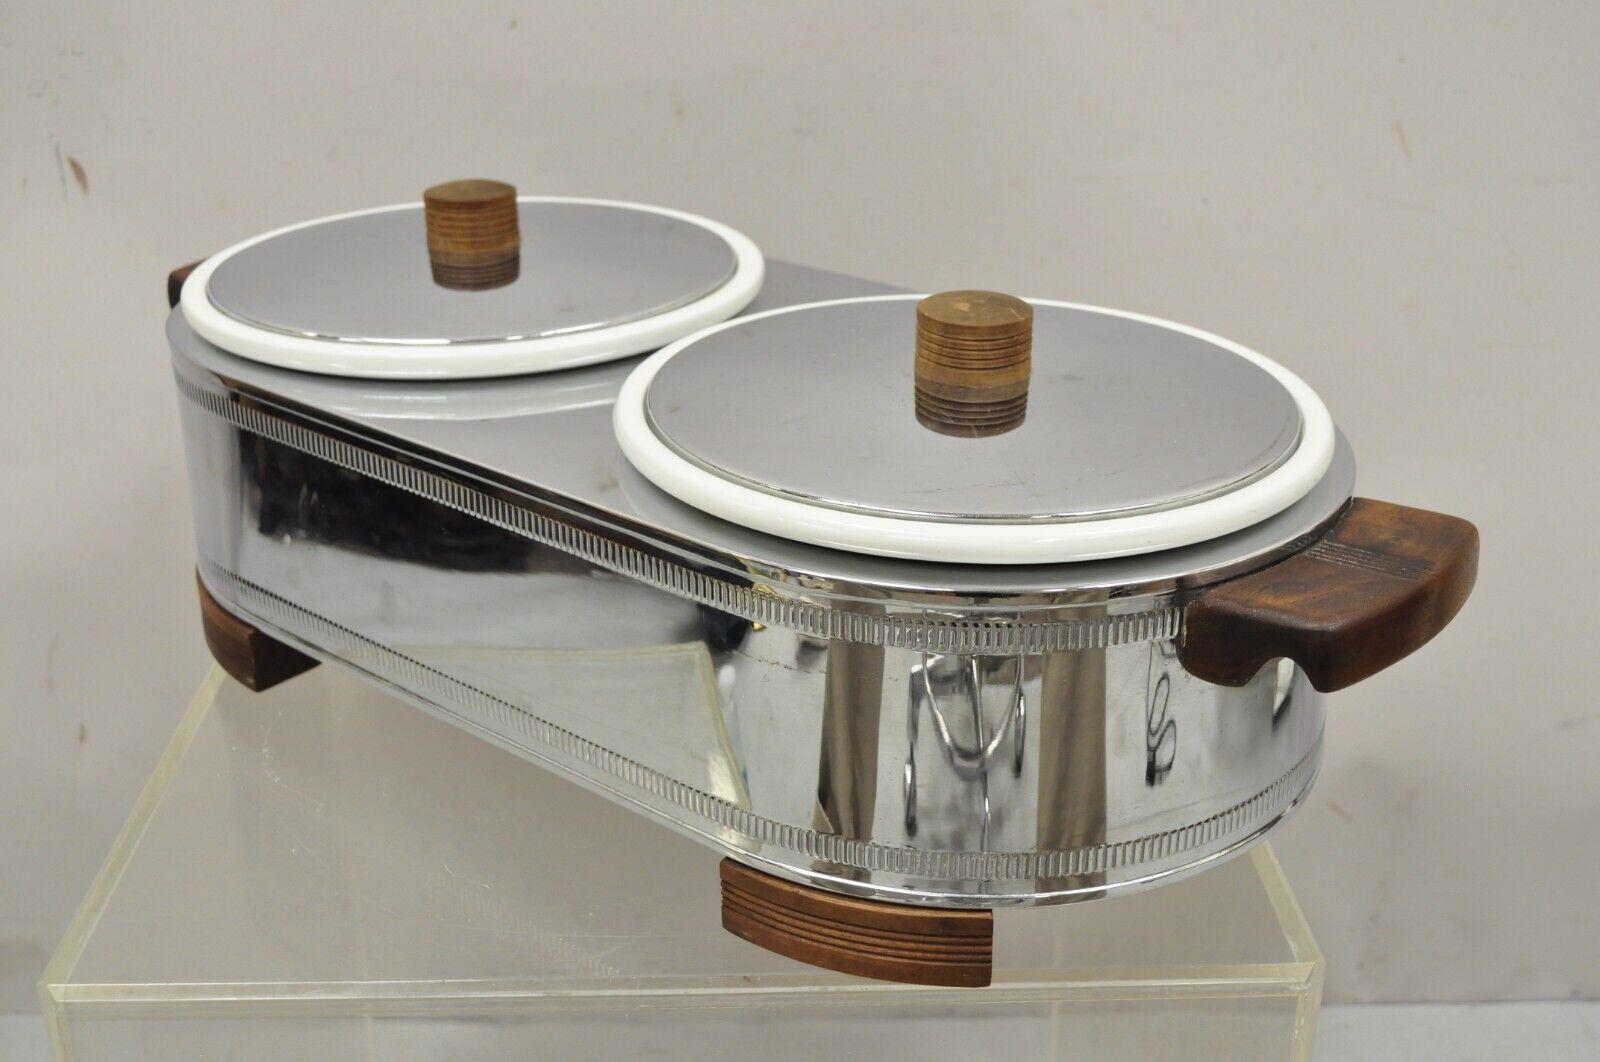 Vintage Manning - Bowman Art Deco stainless steel double warmer 2 ceramic dishes. Item features 2 removable ceramic dishes, stainless steel lids, wooden handles and feet, original stamp, very nice vintage item, tested and it does appear to work.